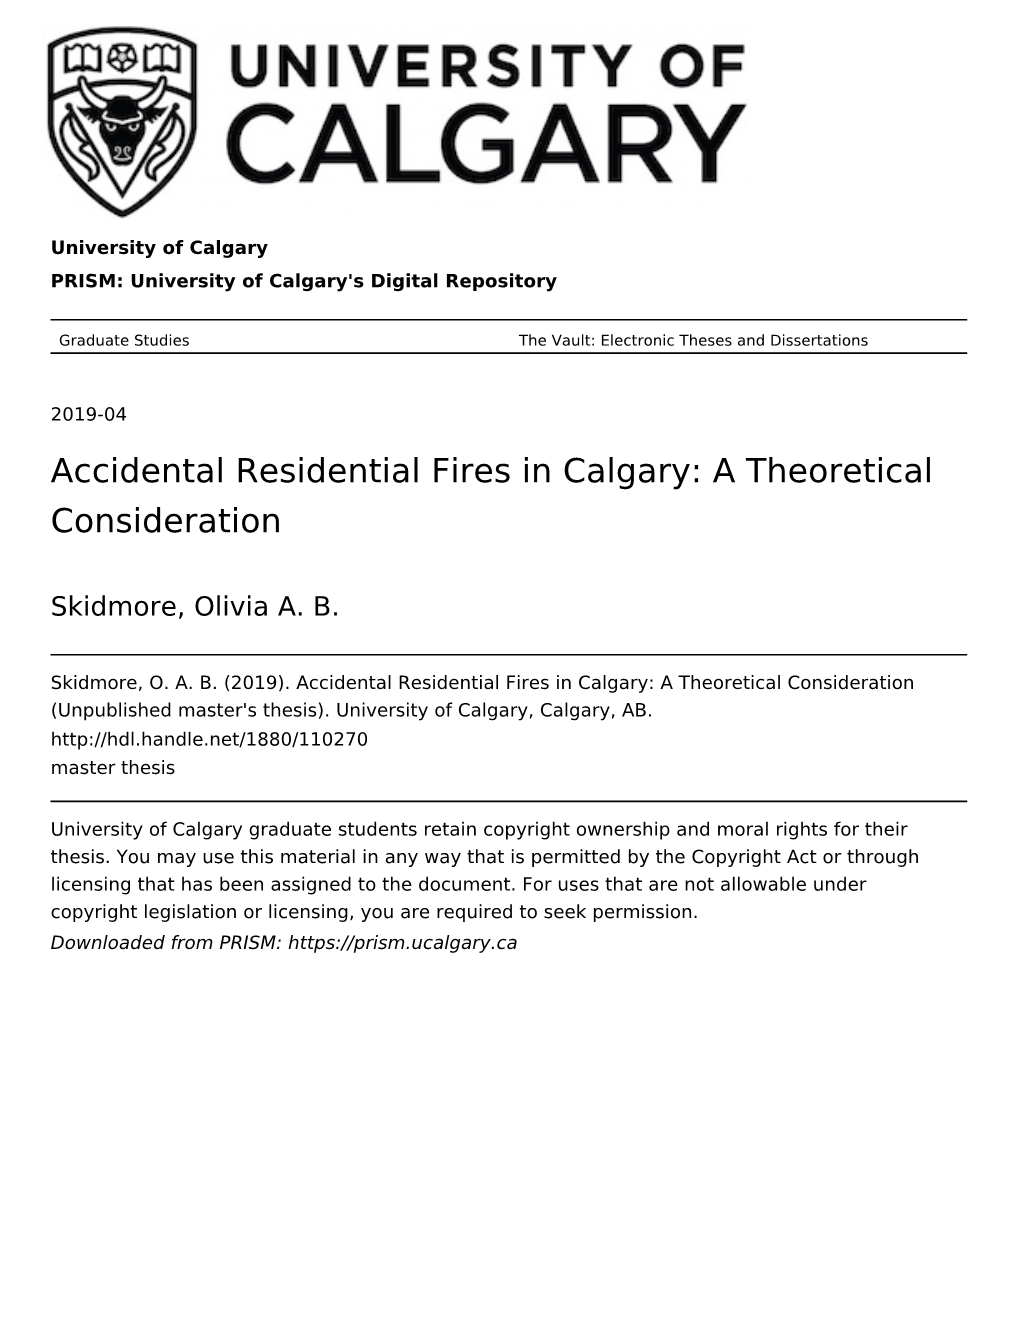 Accidental Residential Fires in Calgary: a Theoretical Consideration